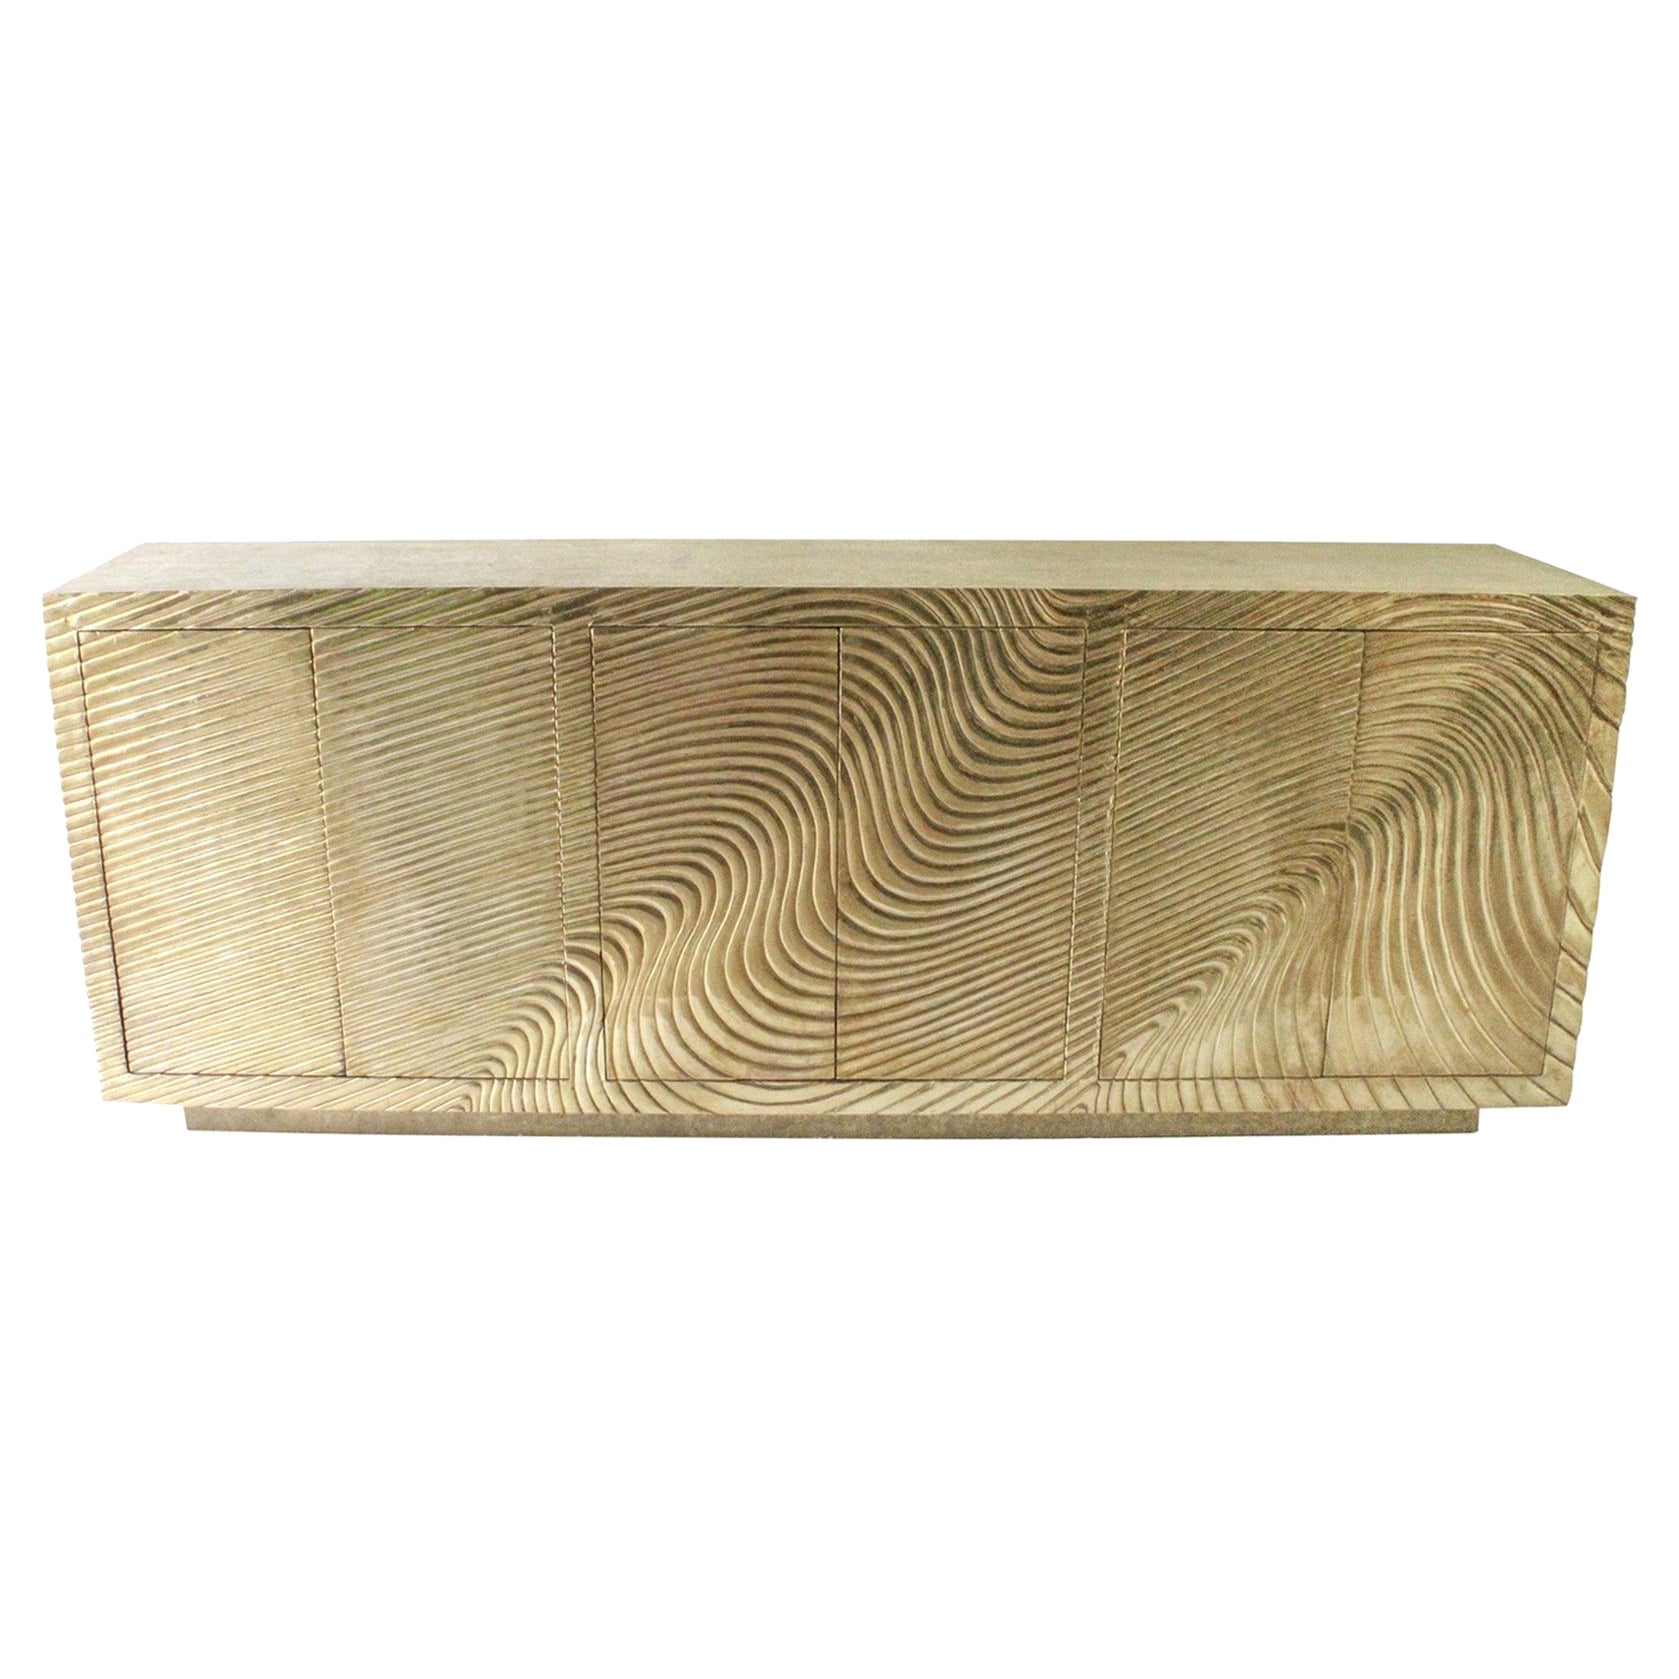 Wave Credenza in Brass Clad Over Teak Handcrafted in India by Stephanie Odegard